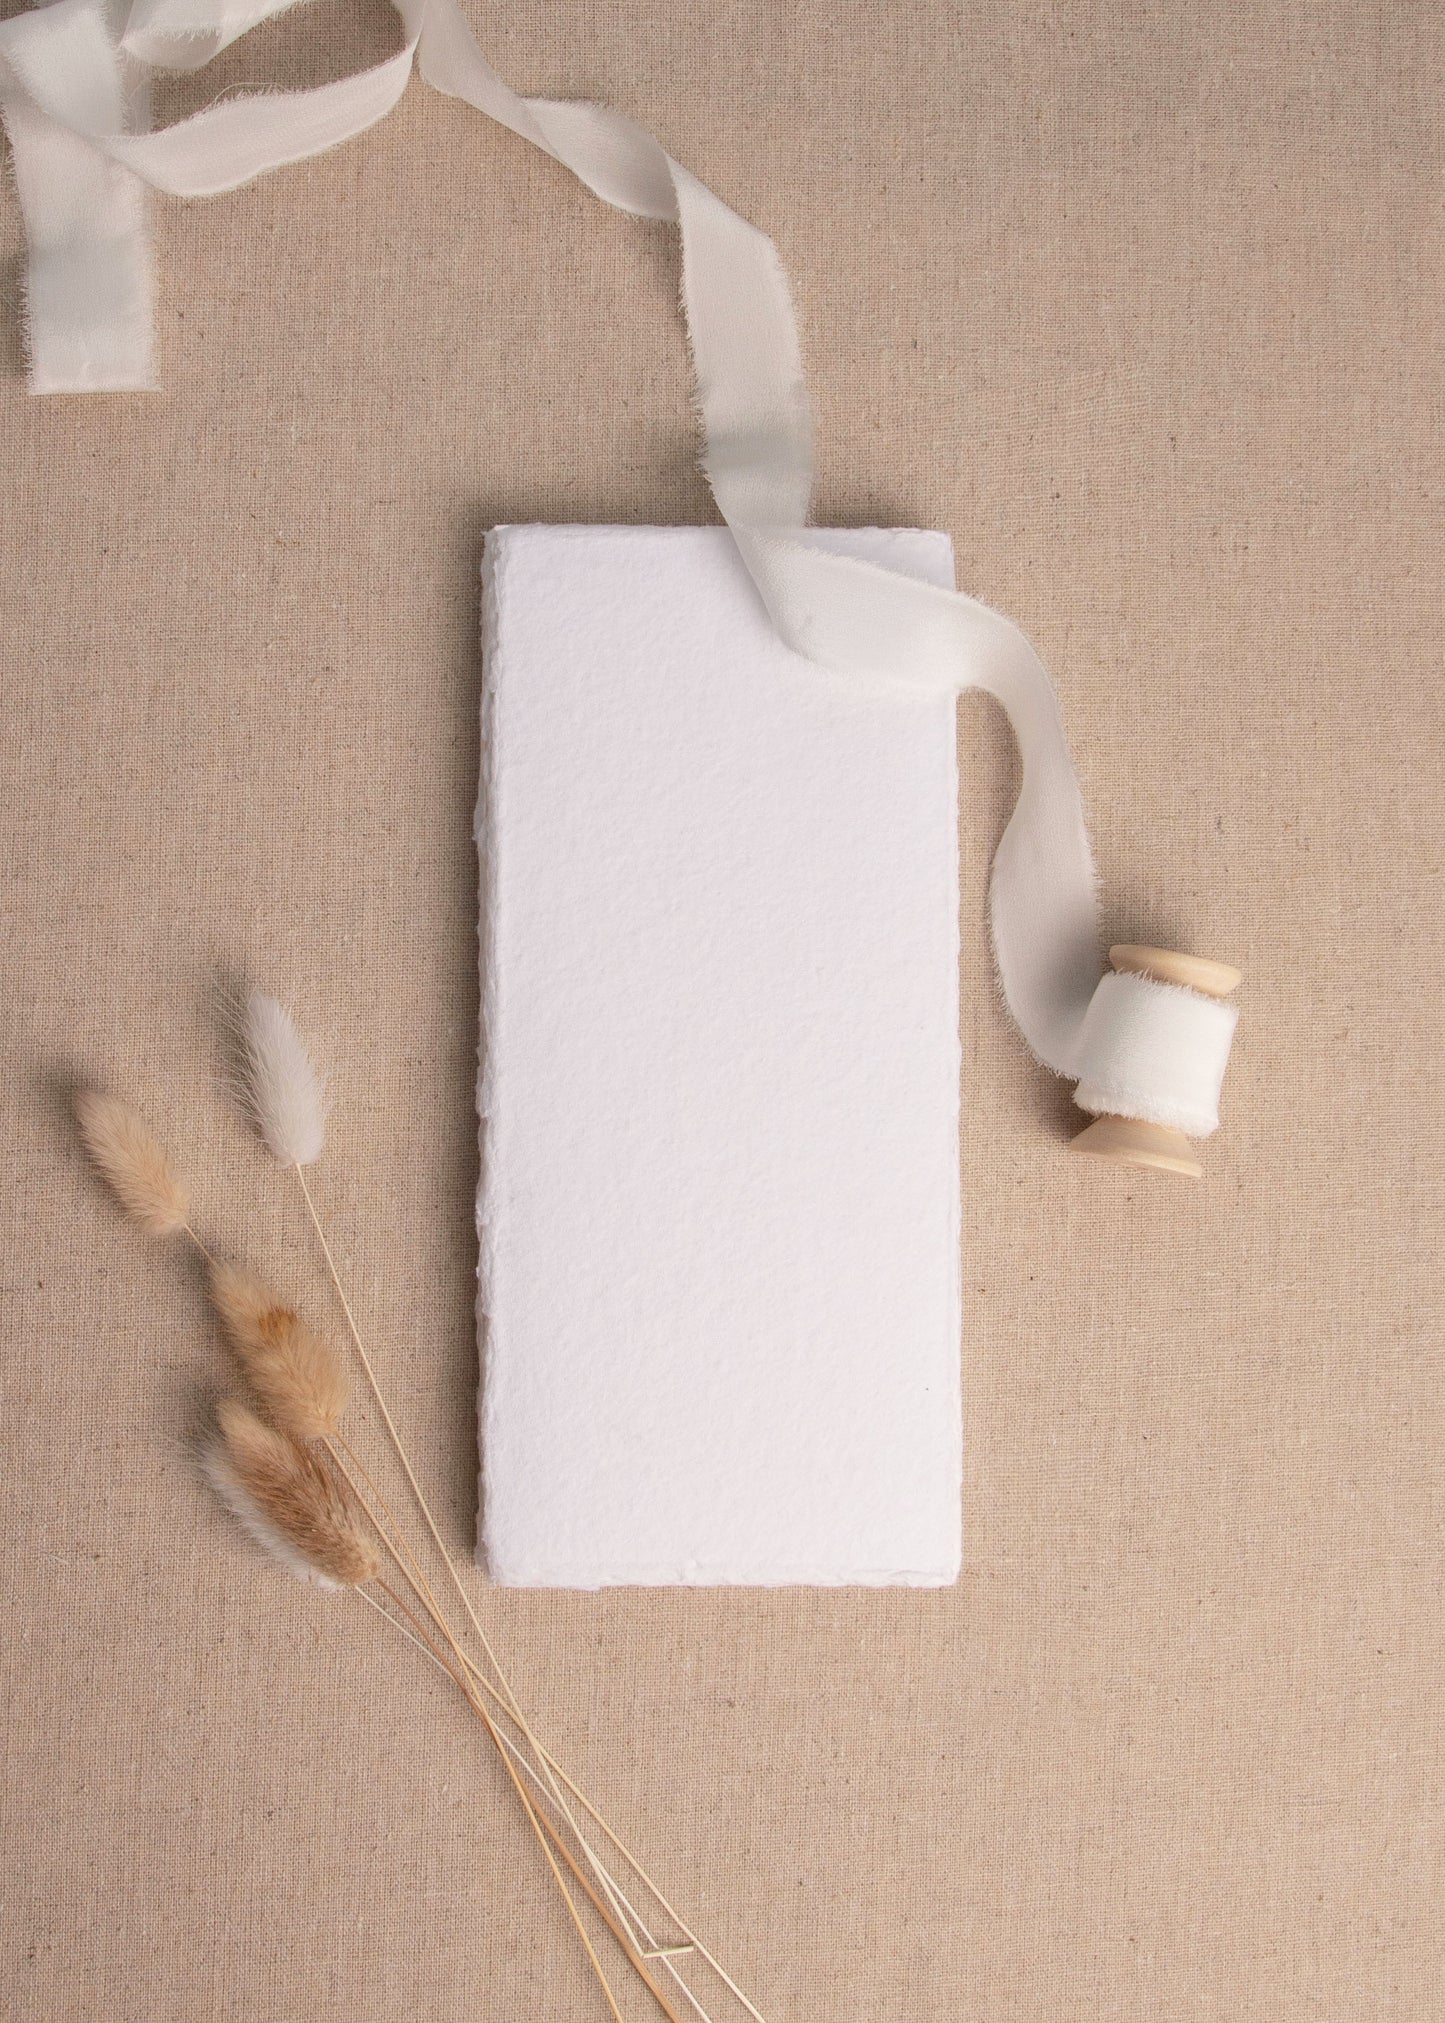 Menu size White handmade paper with deckle edge surrounded by dried flowers and white ribbon spool